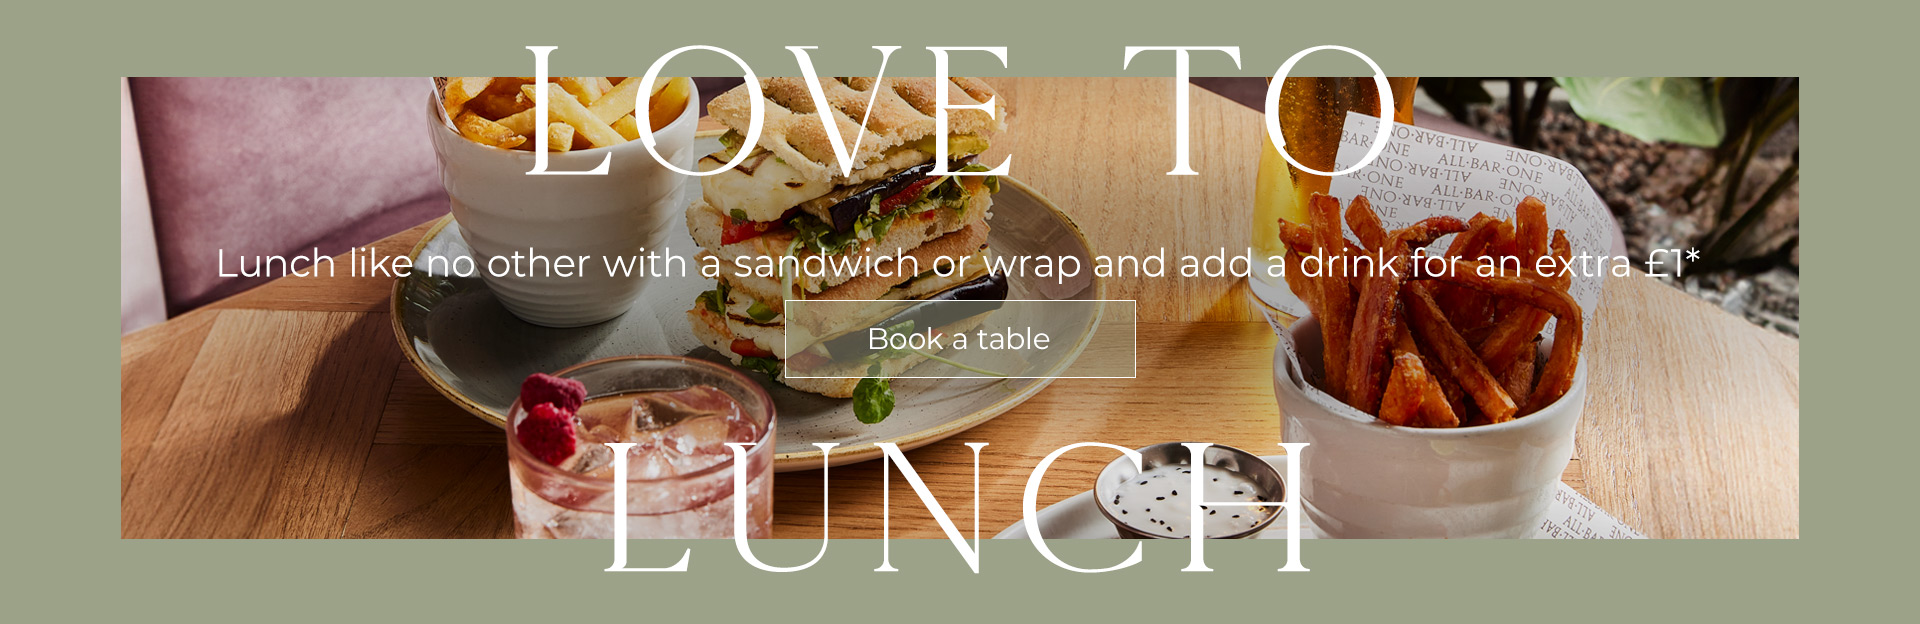 Lunch Offer at All Bar One New Street Station